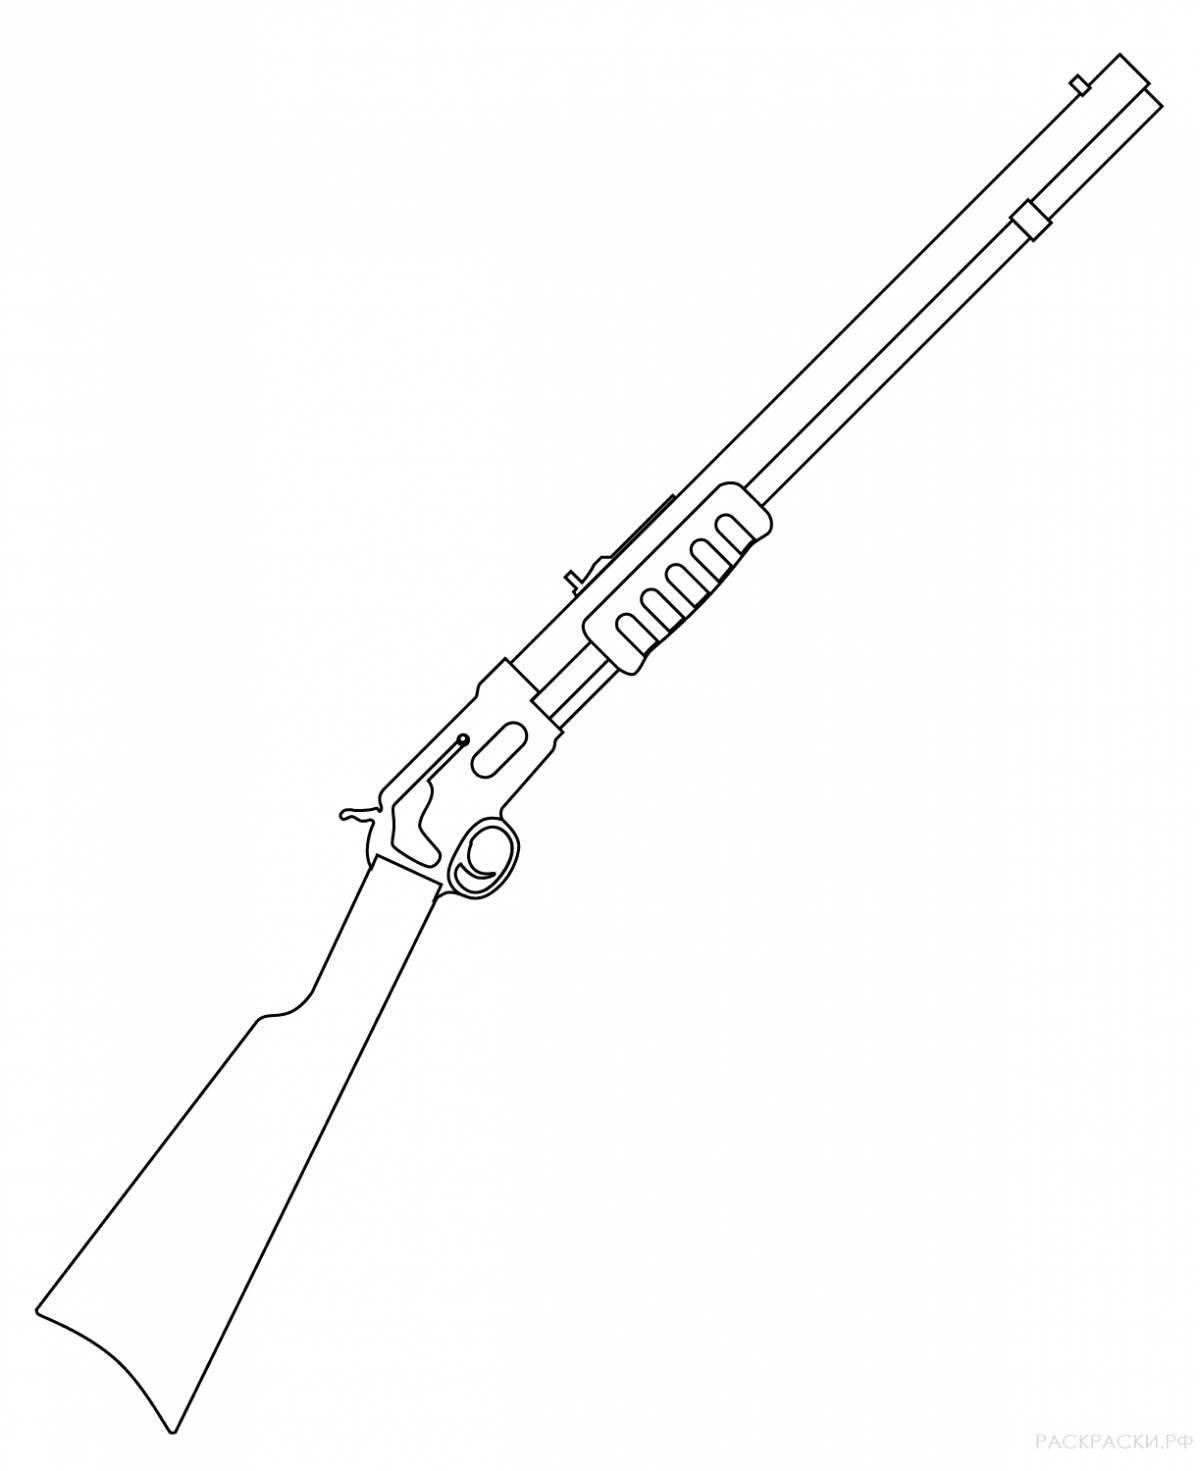 Playful rifle coloring page for kids